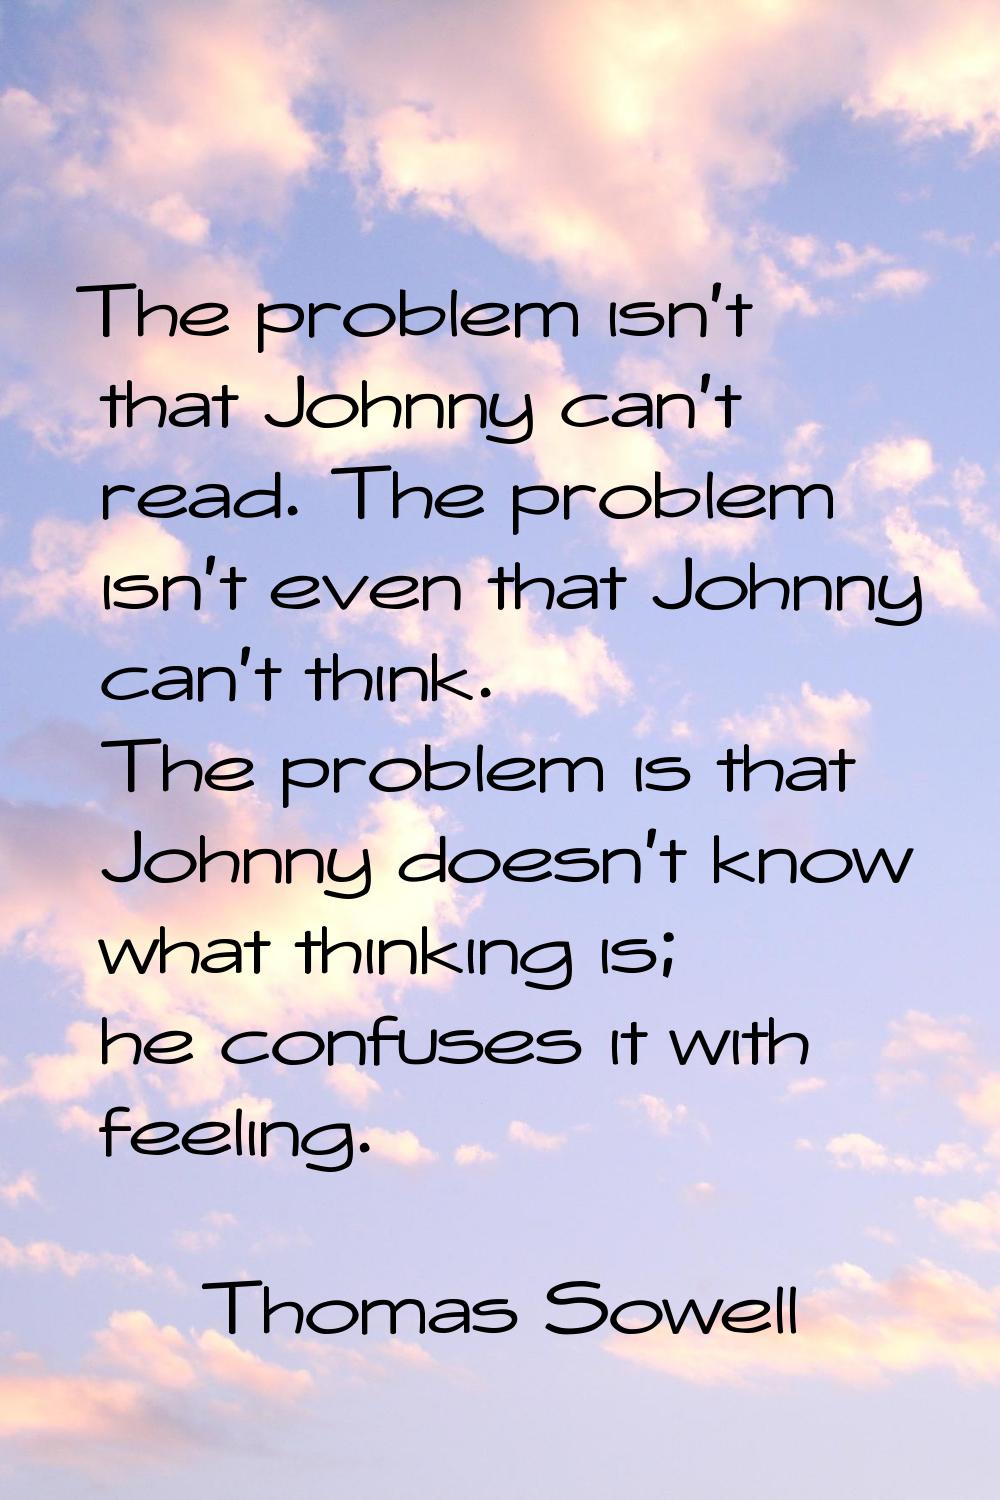 The problem isn't that Johnny can't read. The problem isn't even that Johnny can't think. The probl